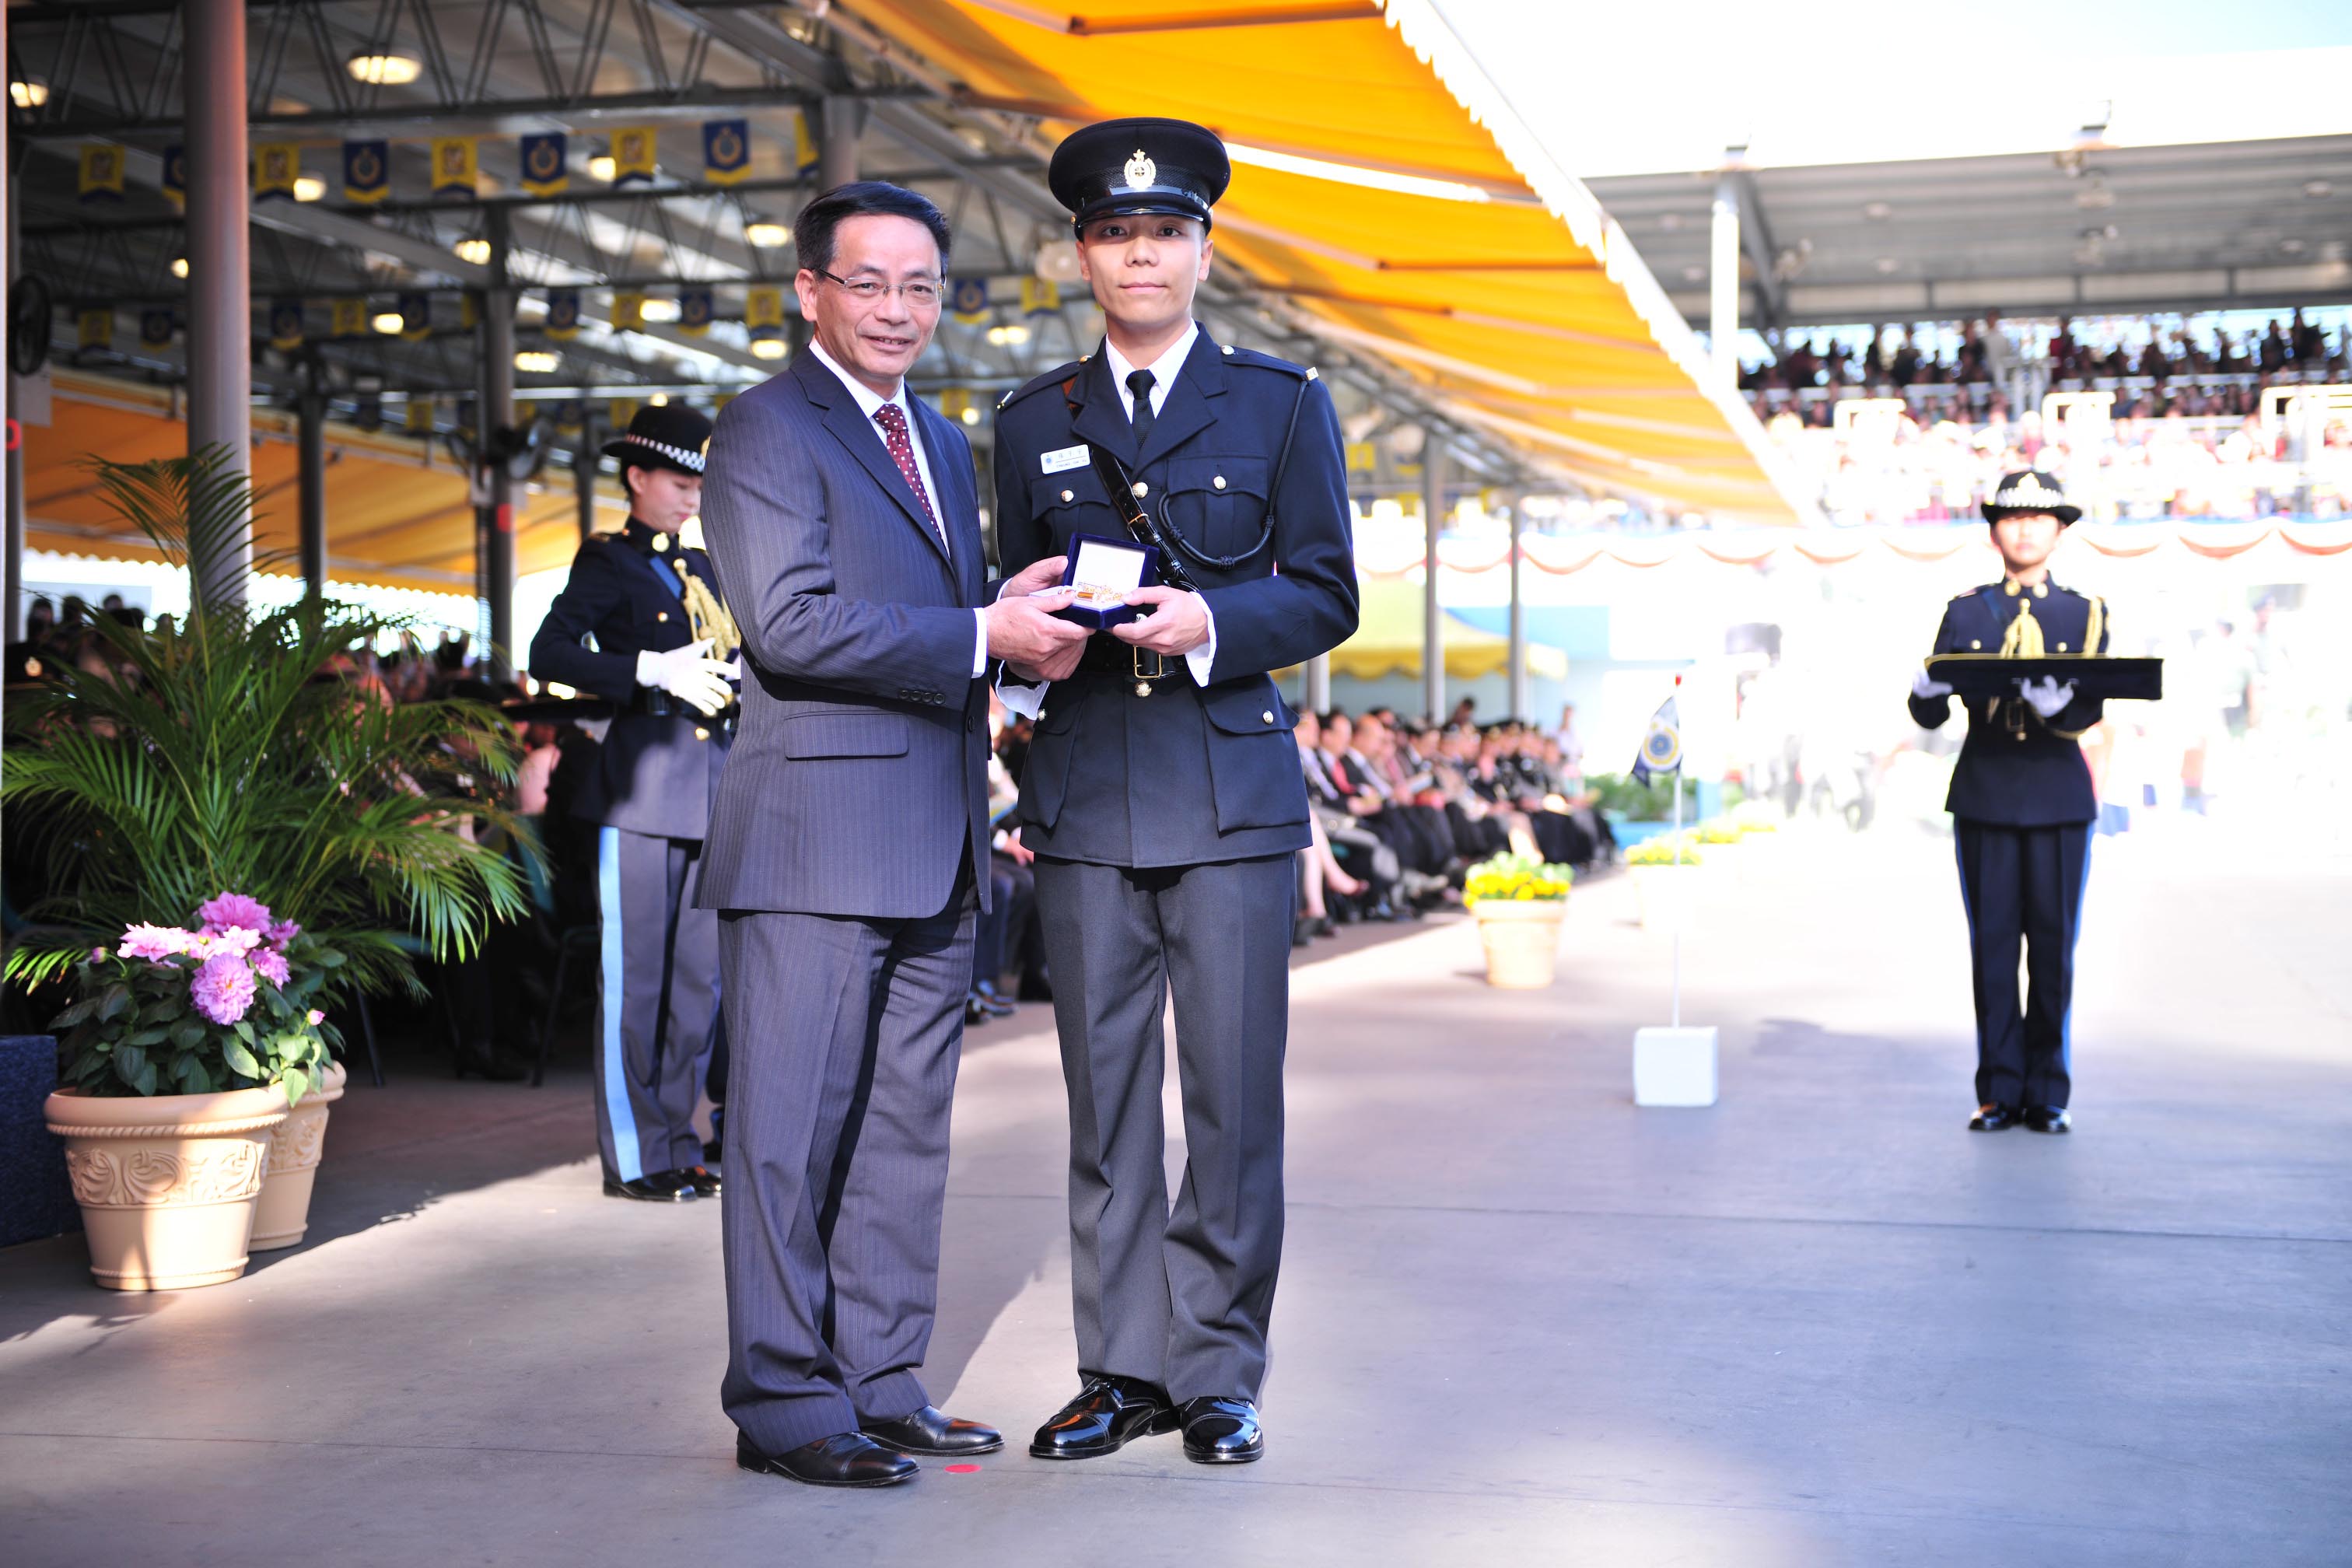 Mr Ip presents the Best Recruit Award, the Golden Whistle, to Assistant Officer II Cheung Chi-yu.